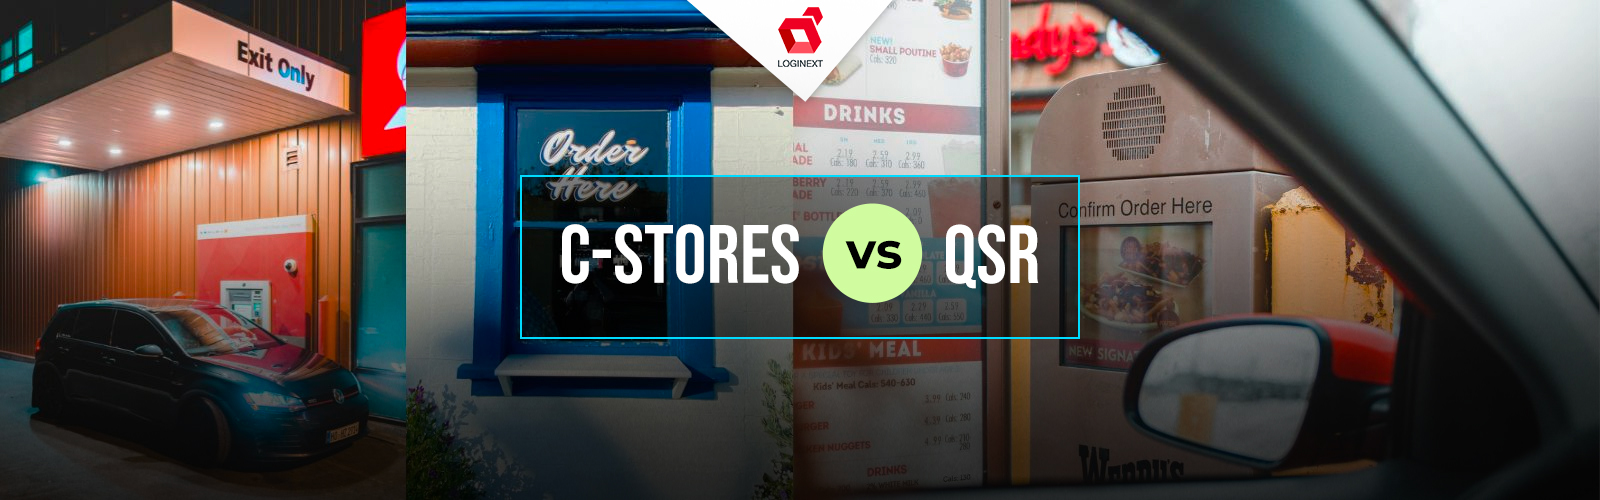 Will convenience stores give QSRs a run for their money?